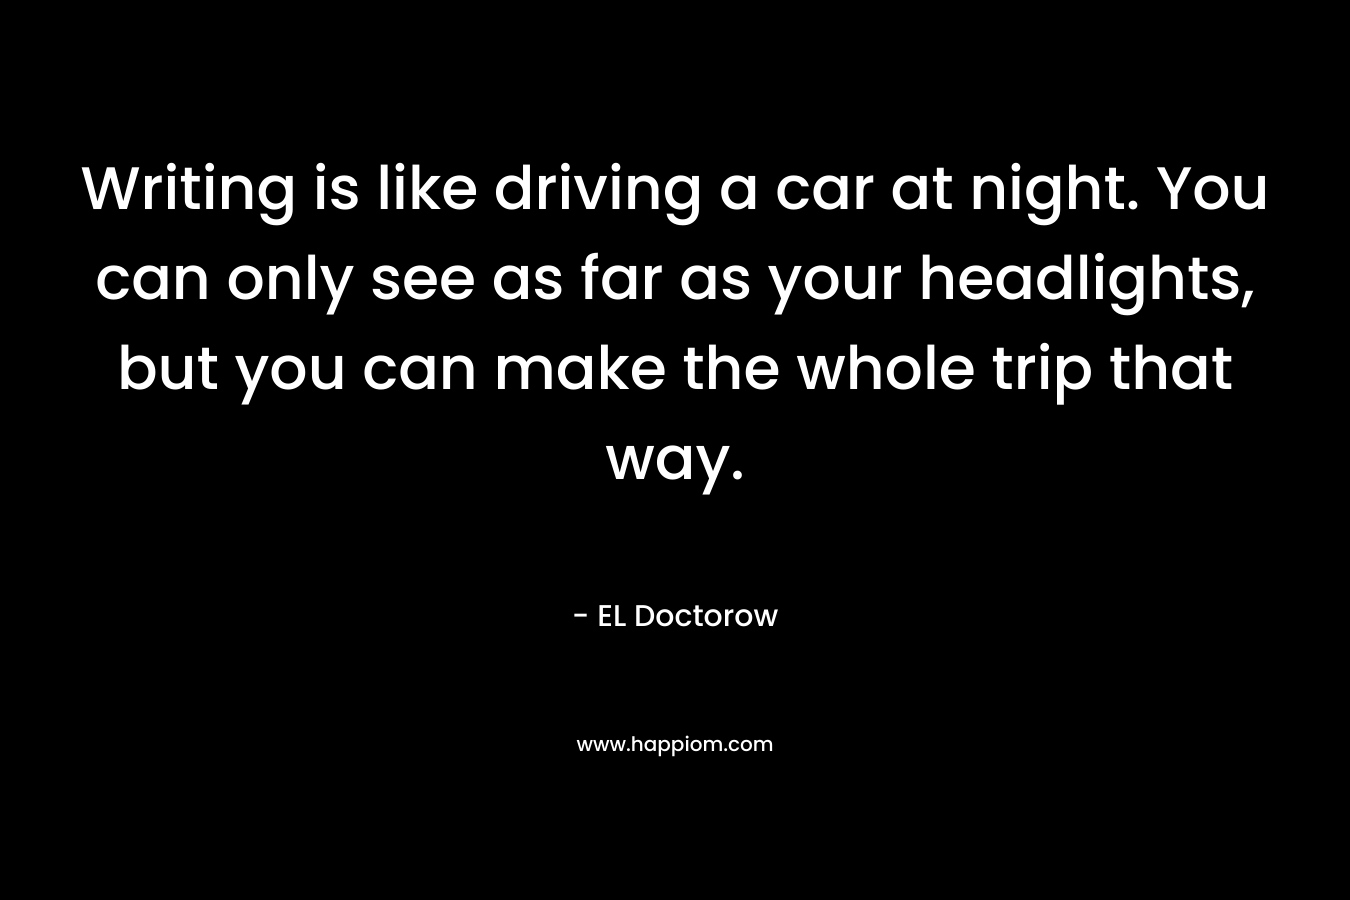 Writing is like driving a car at night. You can only see as far as your headlights, but you can make the whole trip that way. – EL Doctorow